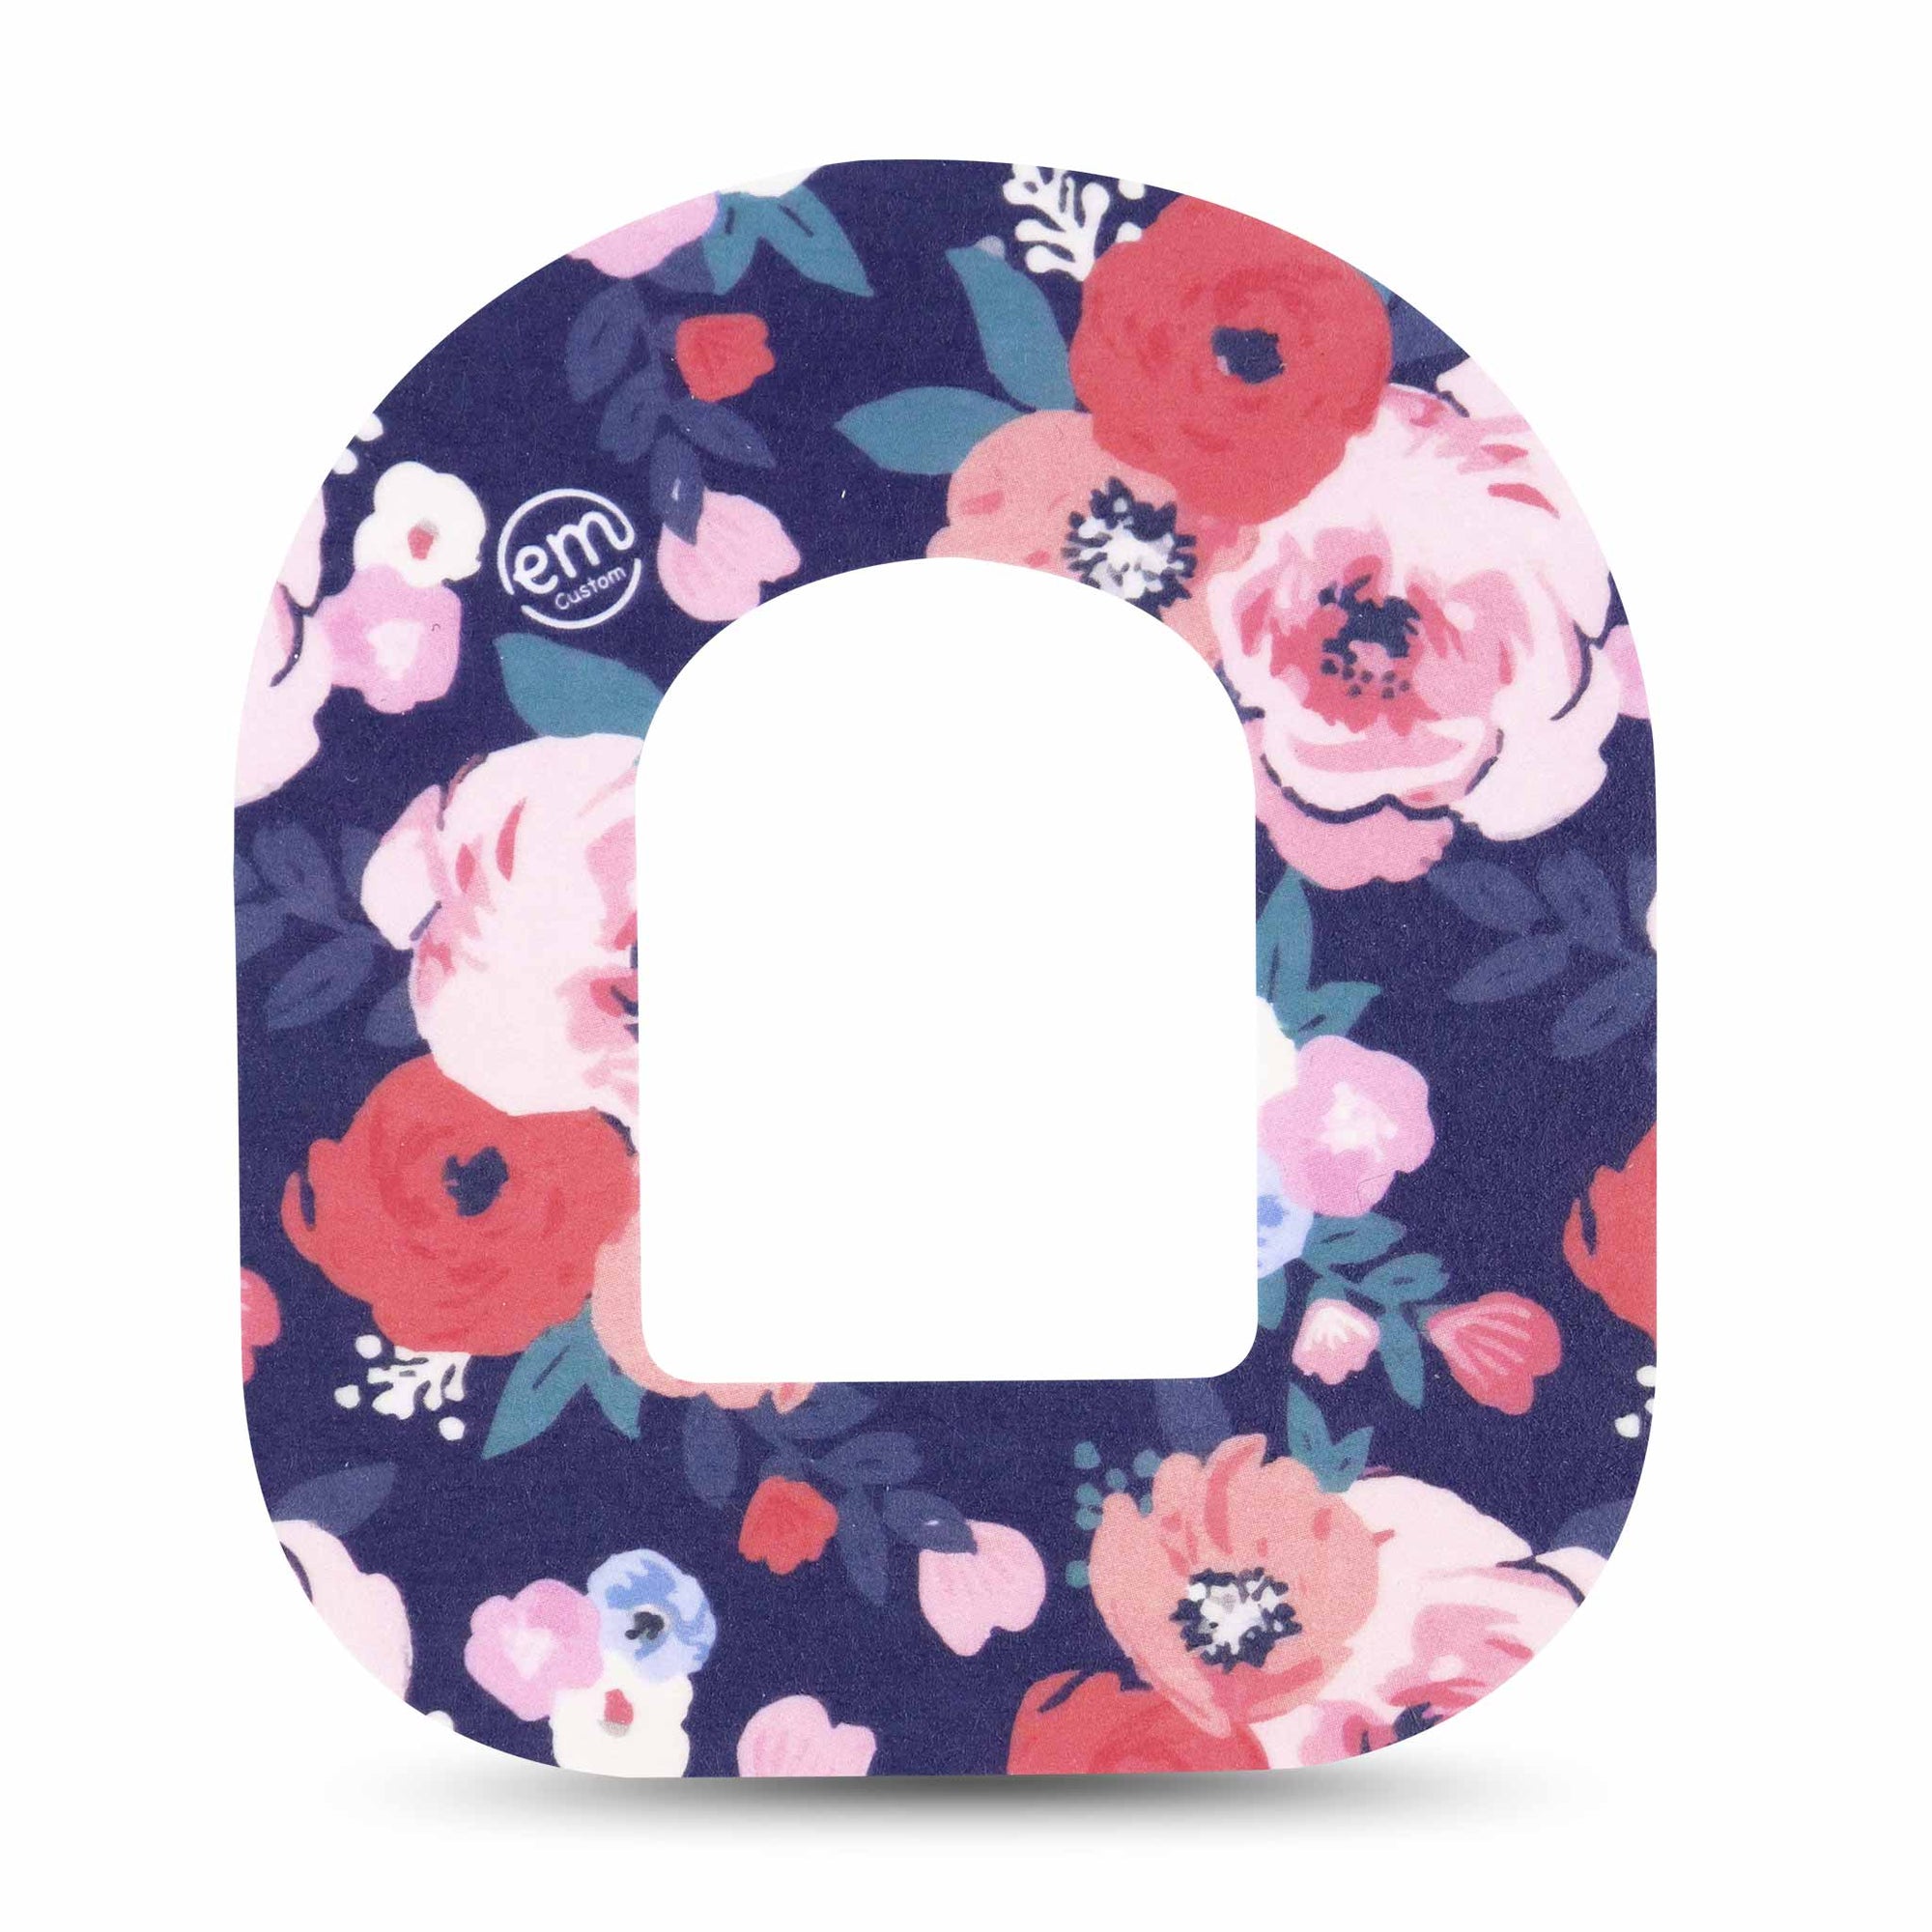 ExpressionMed Painted Flower Pod Tape